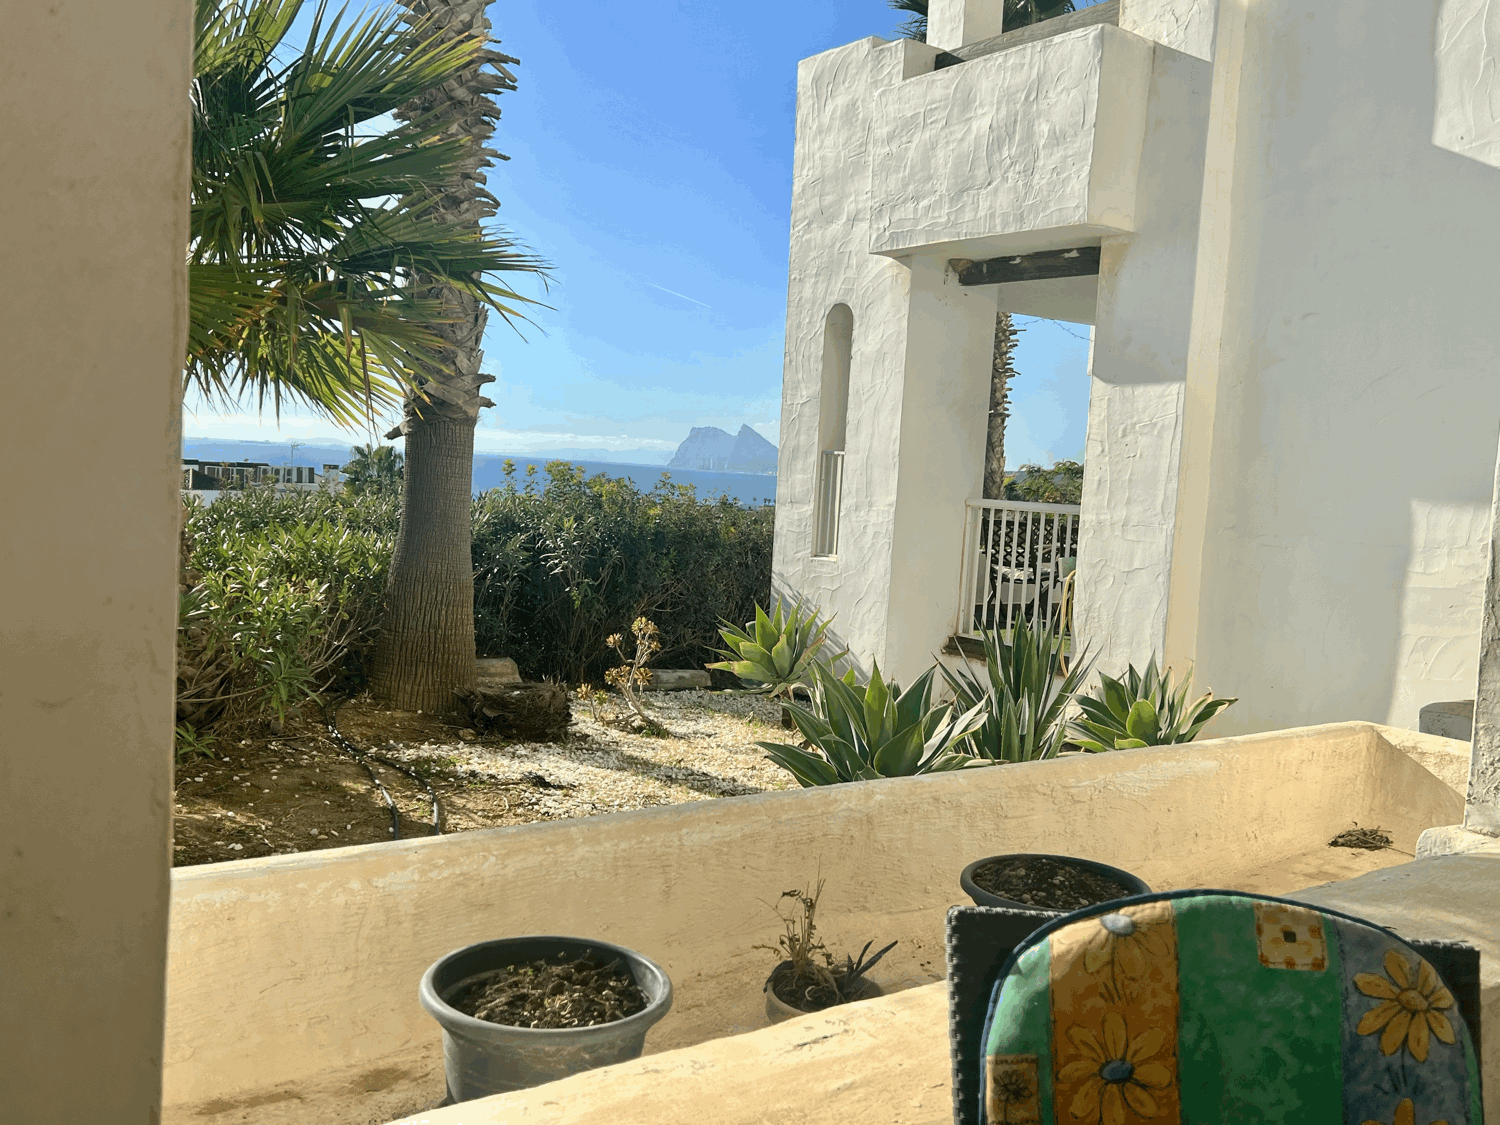 Charming three-bedroom ground floor apartment with beautiful views of the sea and Gibraltar